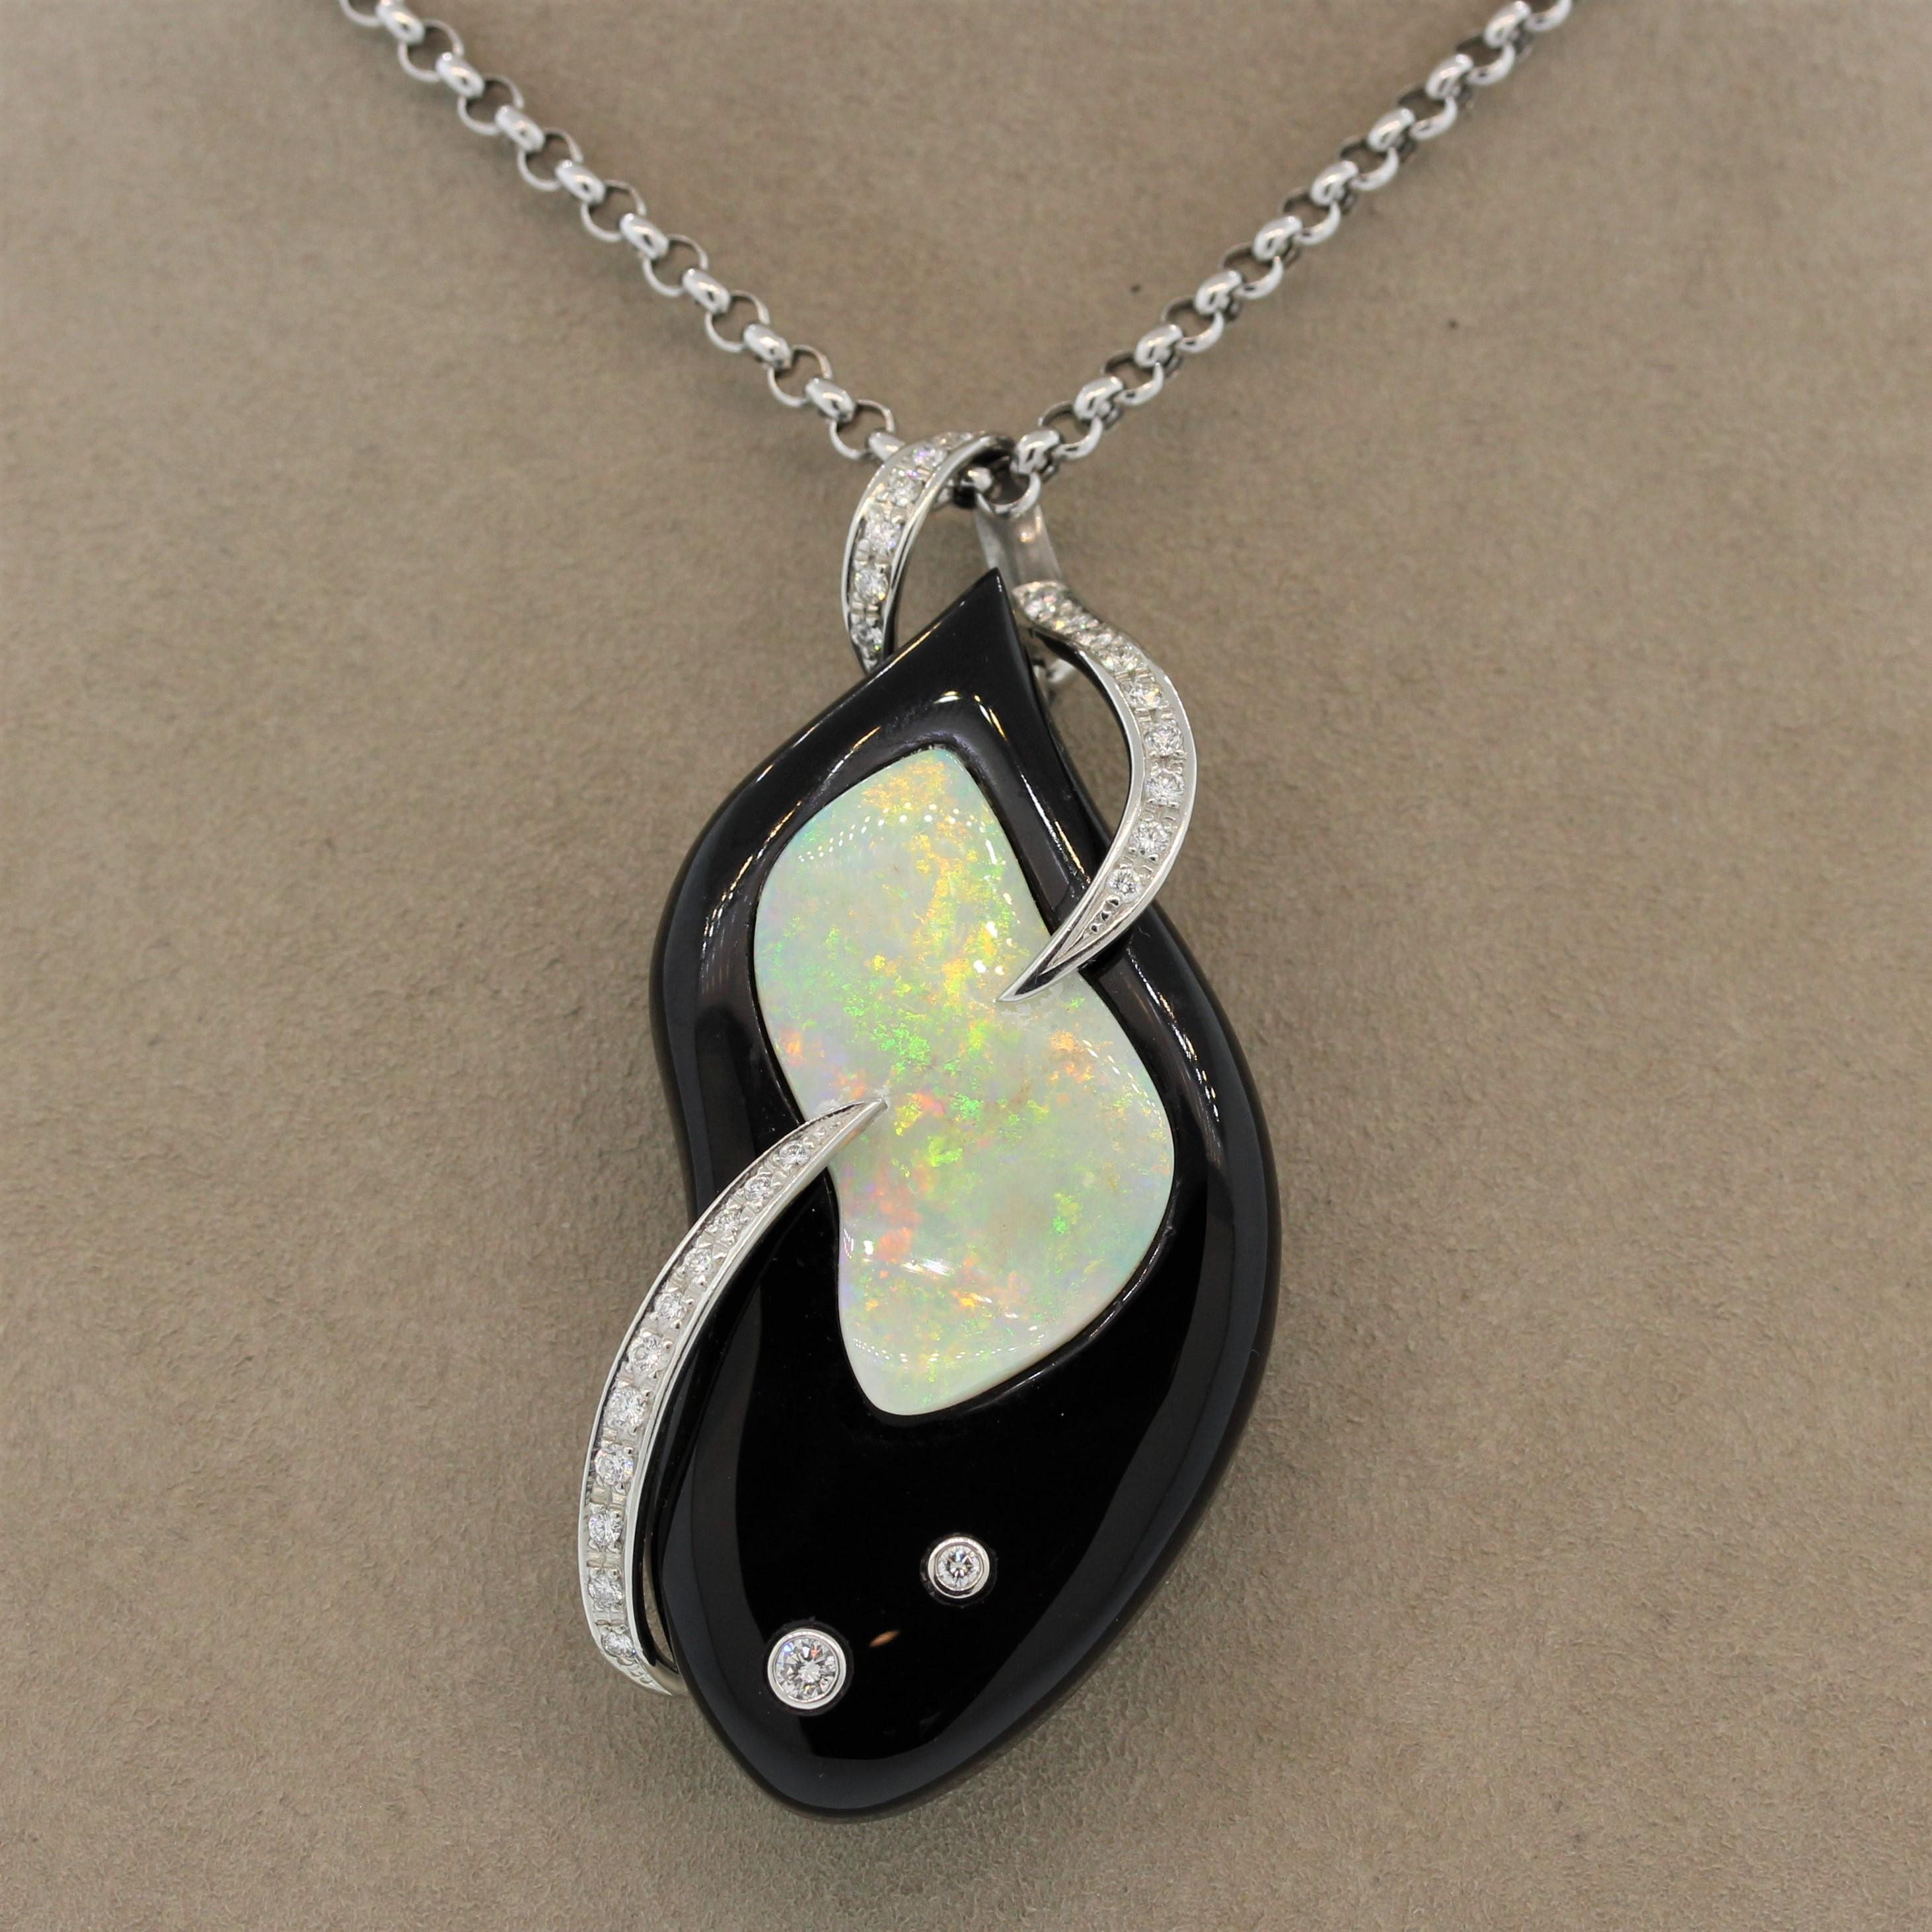 Add interest to your jewelry box with this chic platinum pendant that may also be worn as a brooch. A carved smooth piece of black onyx has a 9.94 carat opal set on top of it creating a great contrast of color between the deep black onyx and the